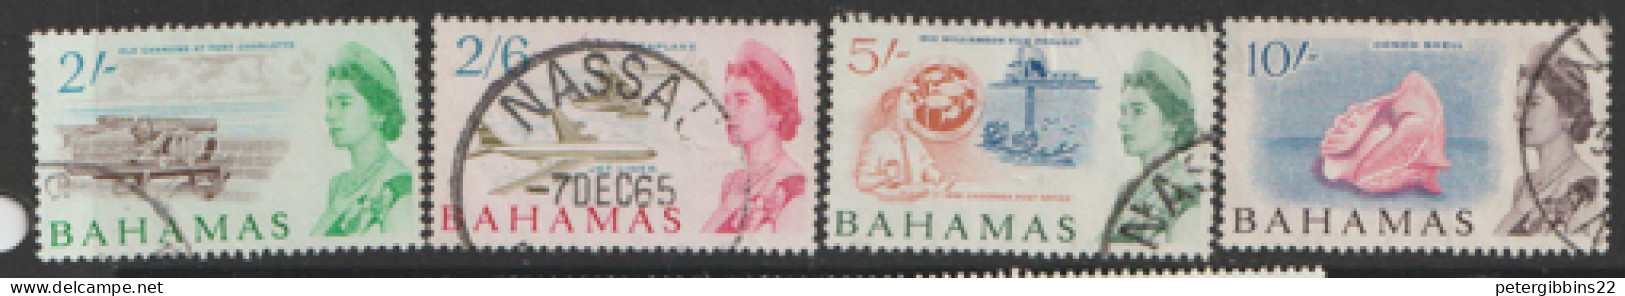 Bahamas 1965  SG 257-60  Fine Used - 1963-1973 Ministerial Government